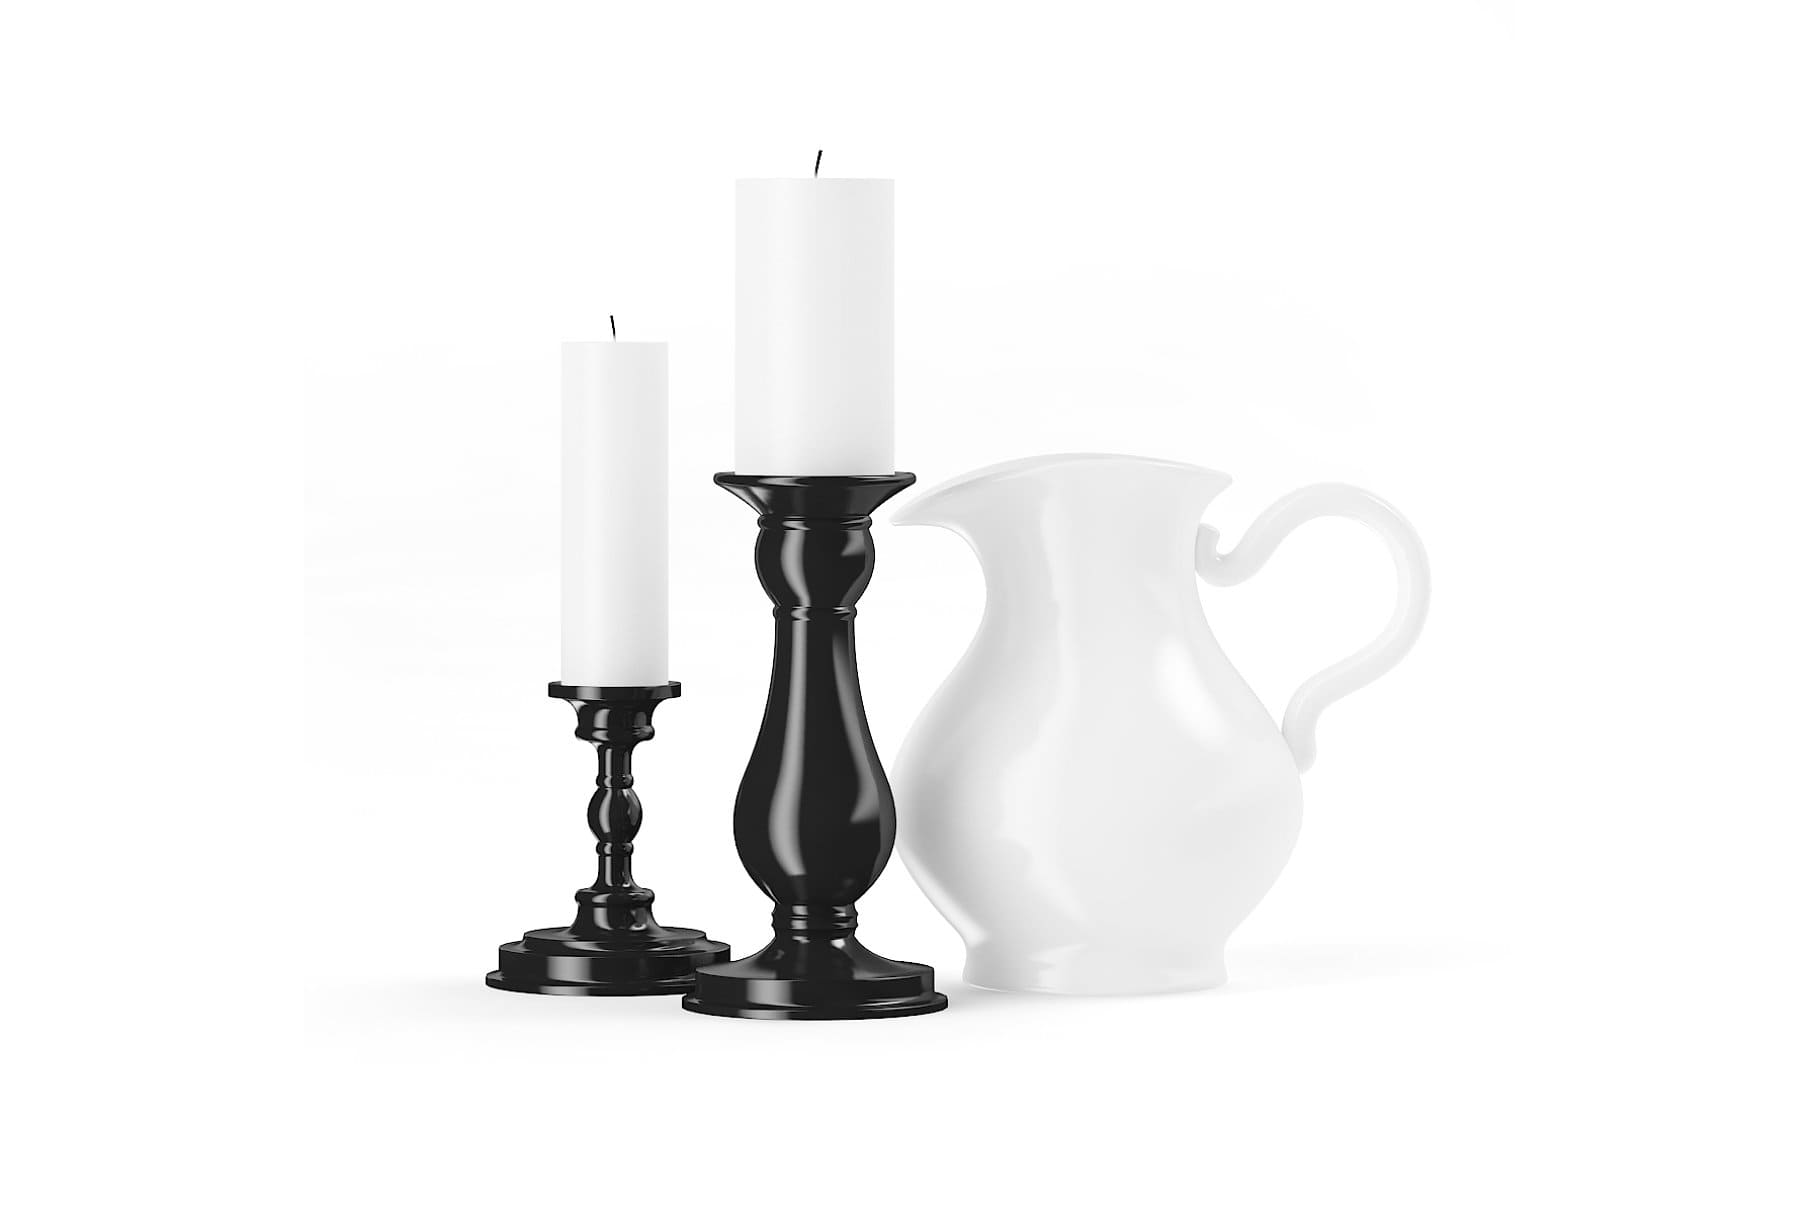 Two white candles on black candlesticks.